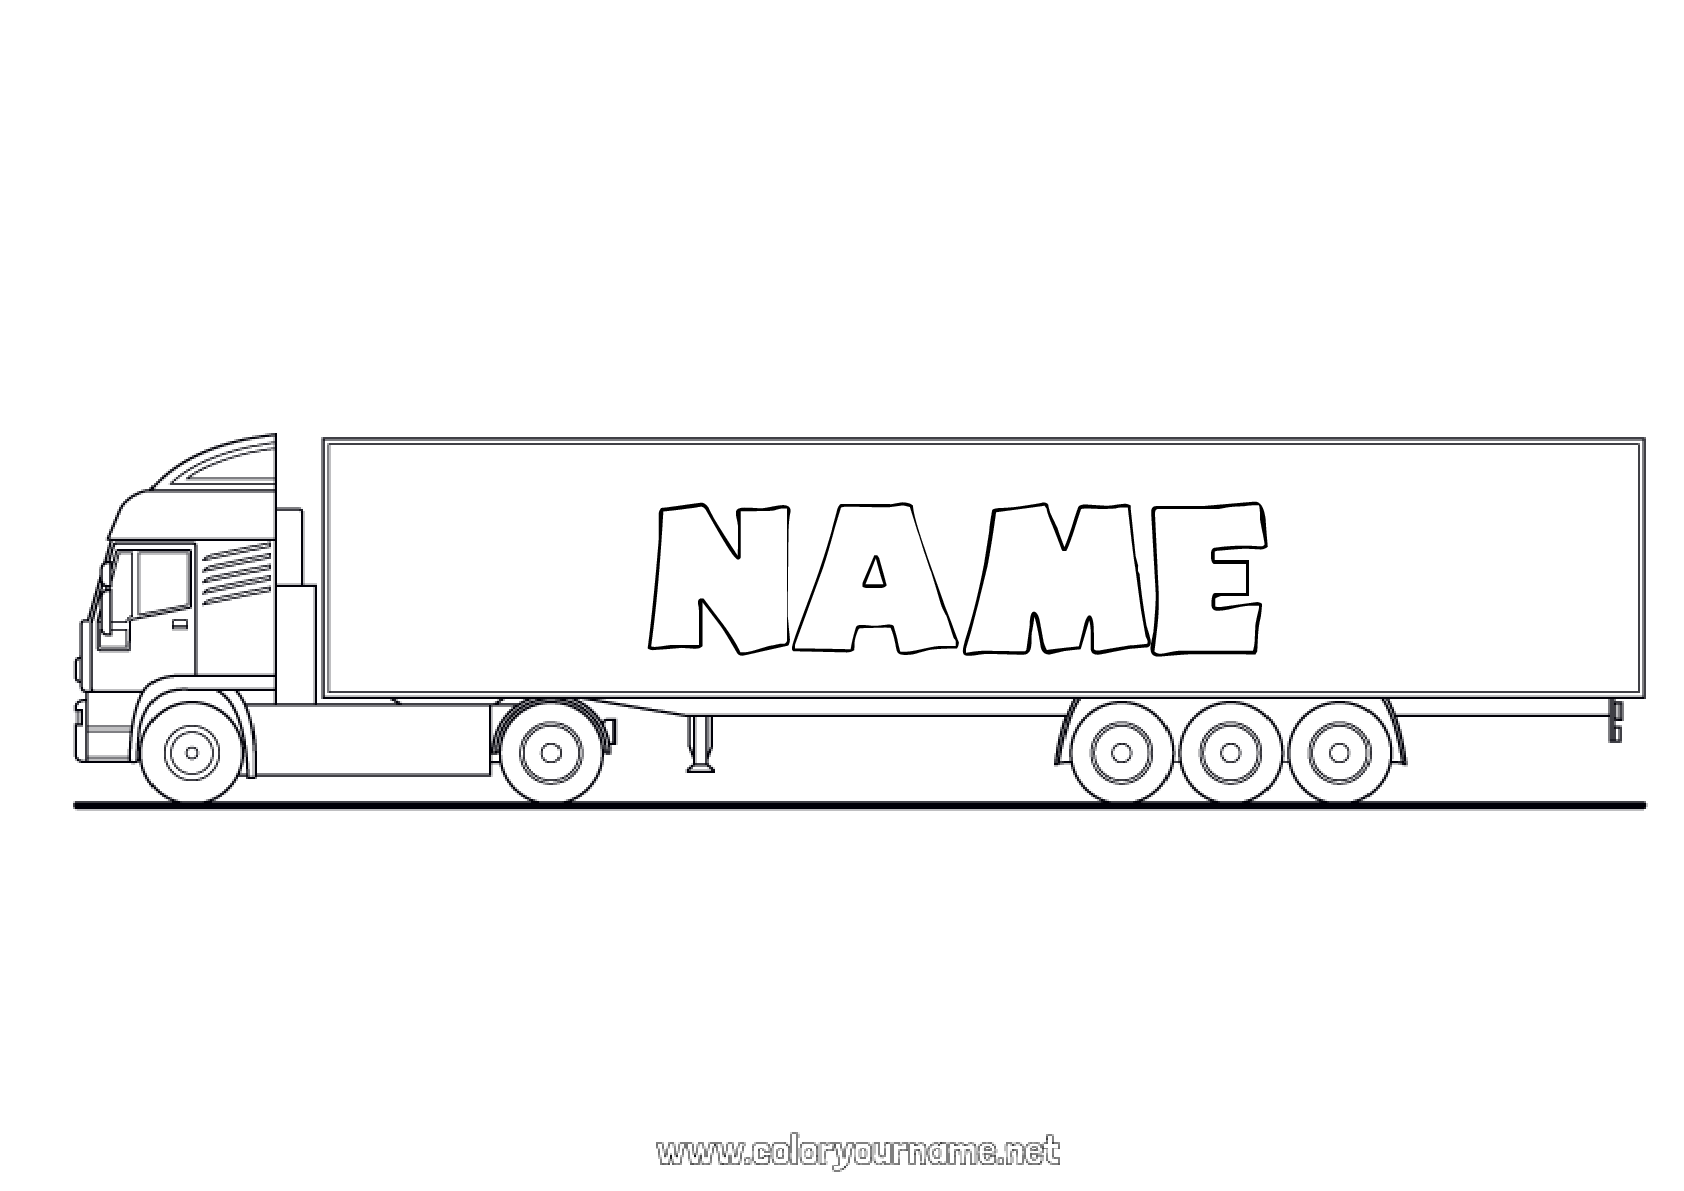 Tractor Trailer Coloring Page